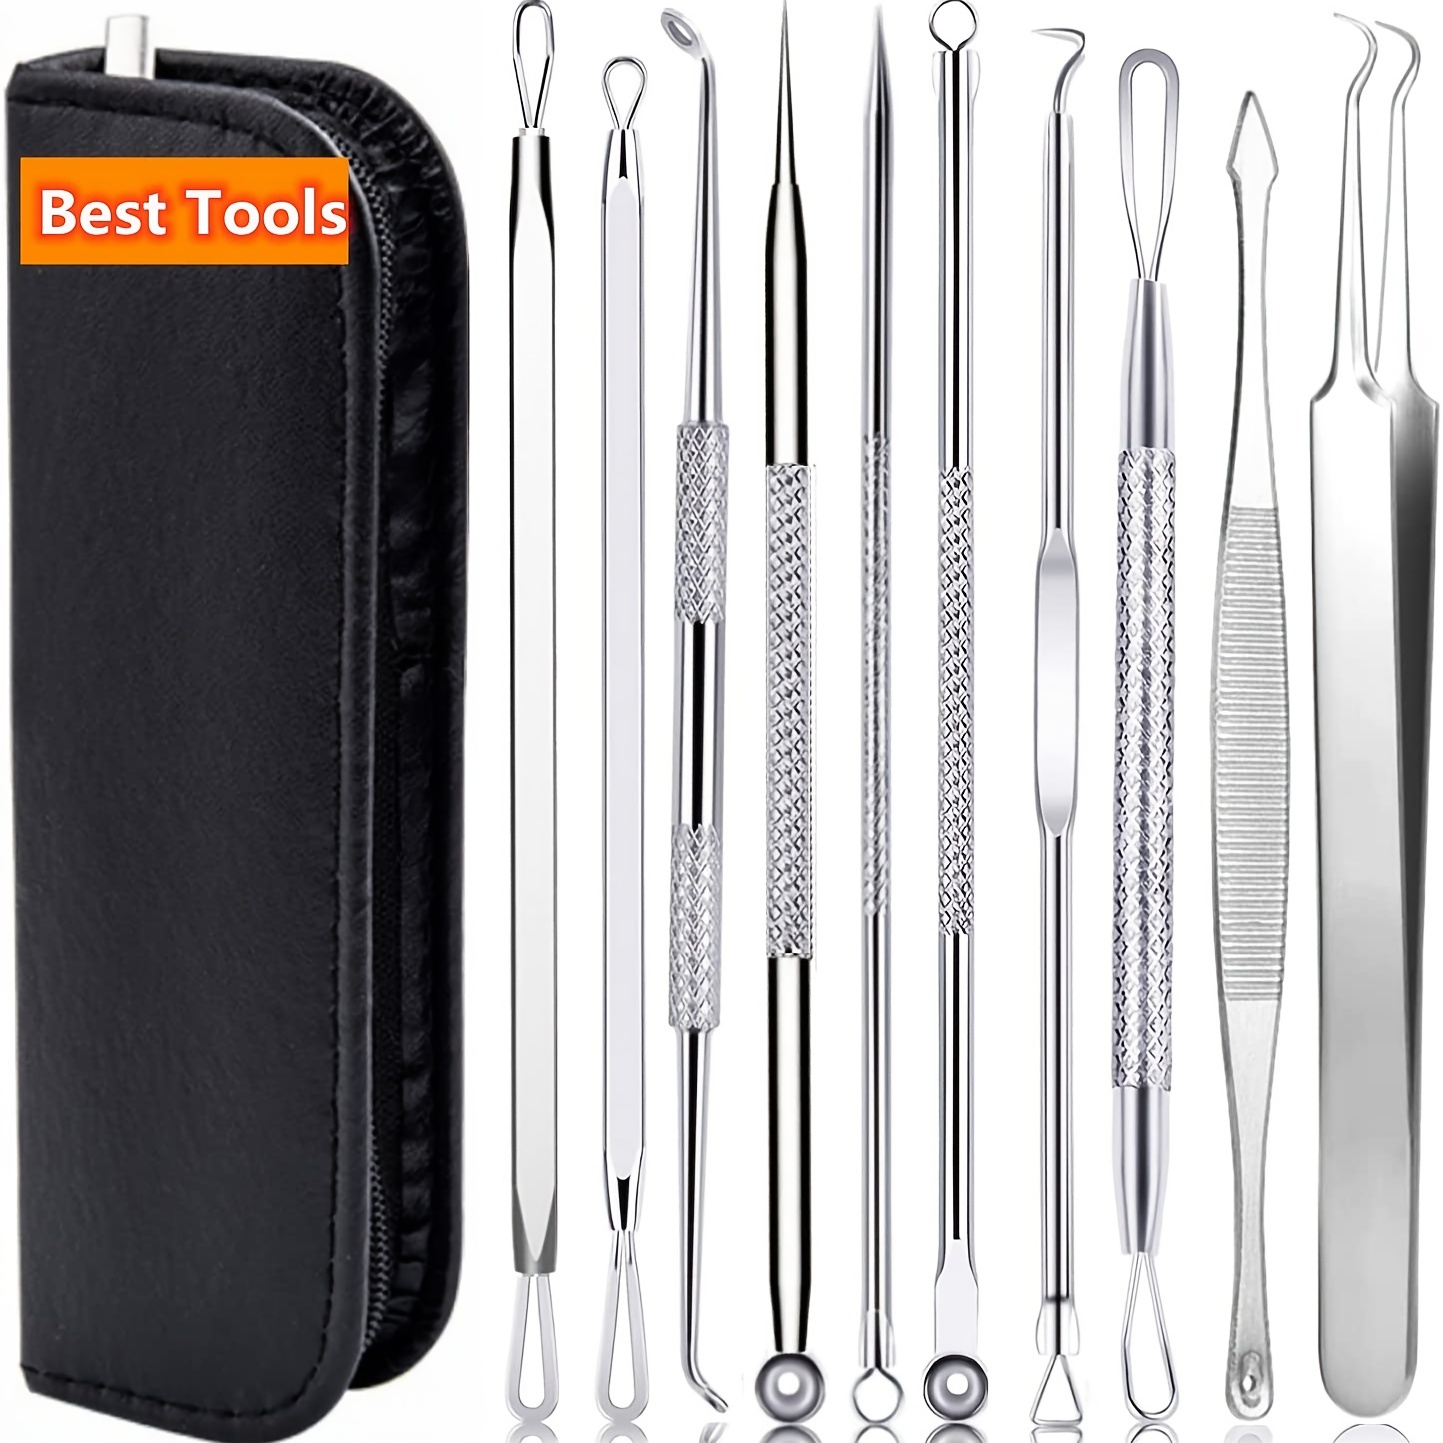 None Brand 5pcs Blackhead Remover Comedone Extractor, Curved Blackhead Tweezers Kit, Professional Stainless Pimple Acne Blemish Removal Tools Kit, 6